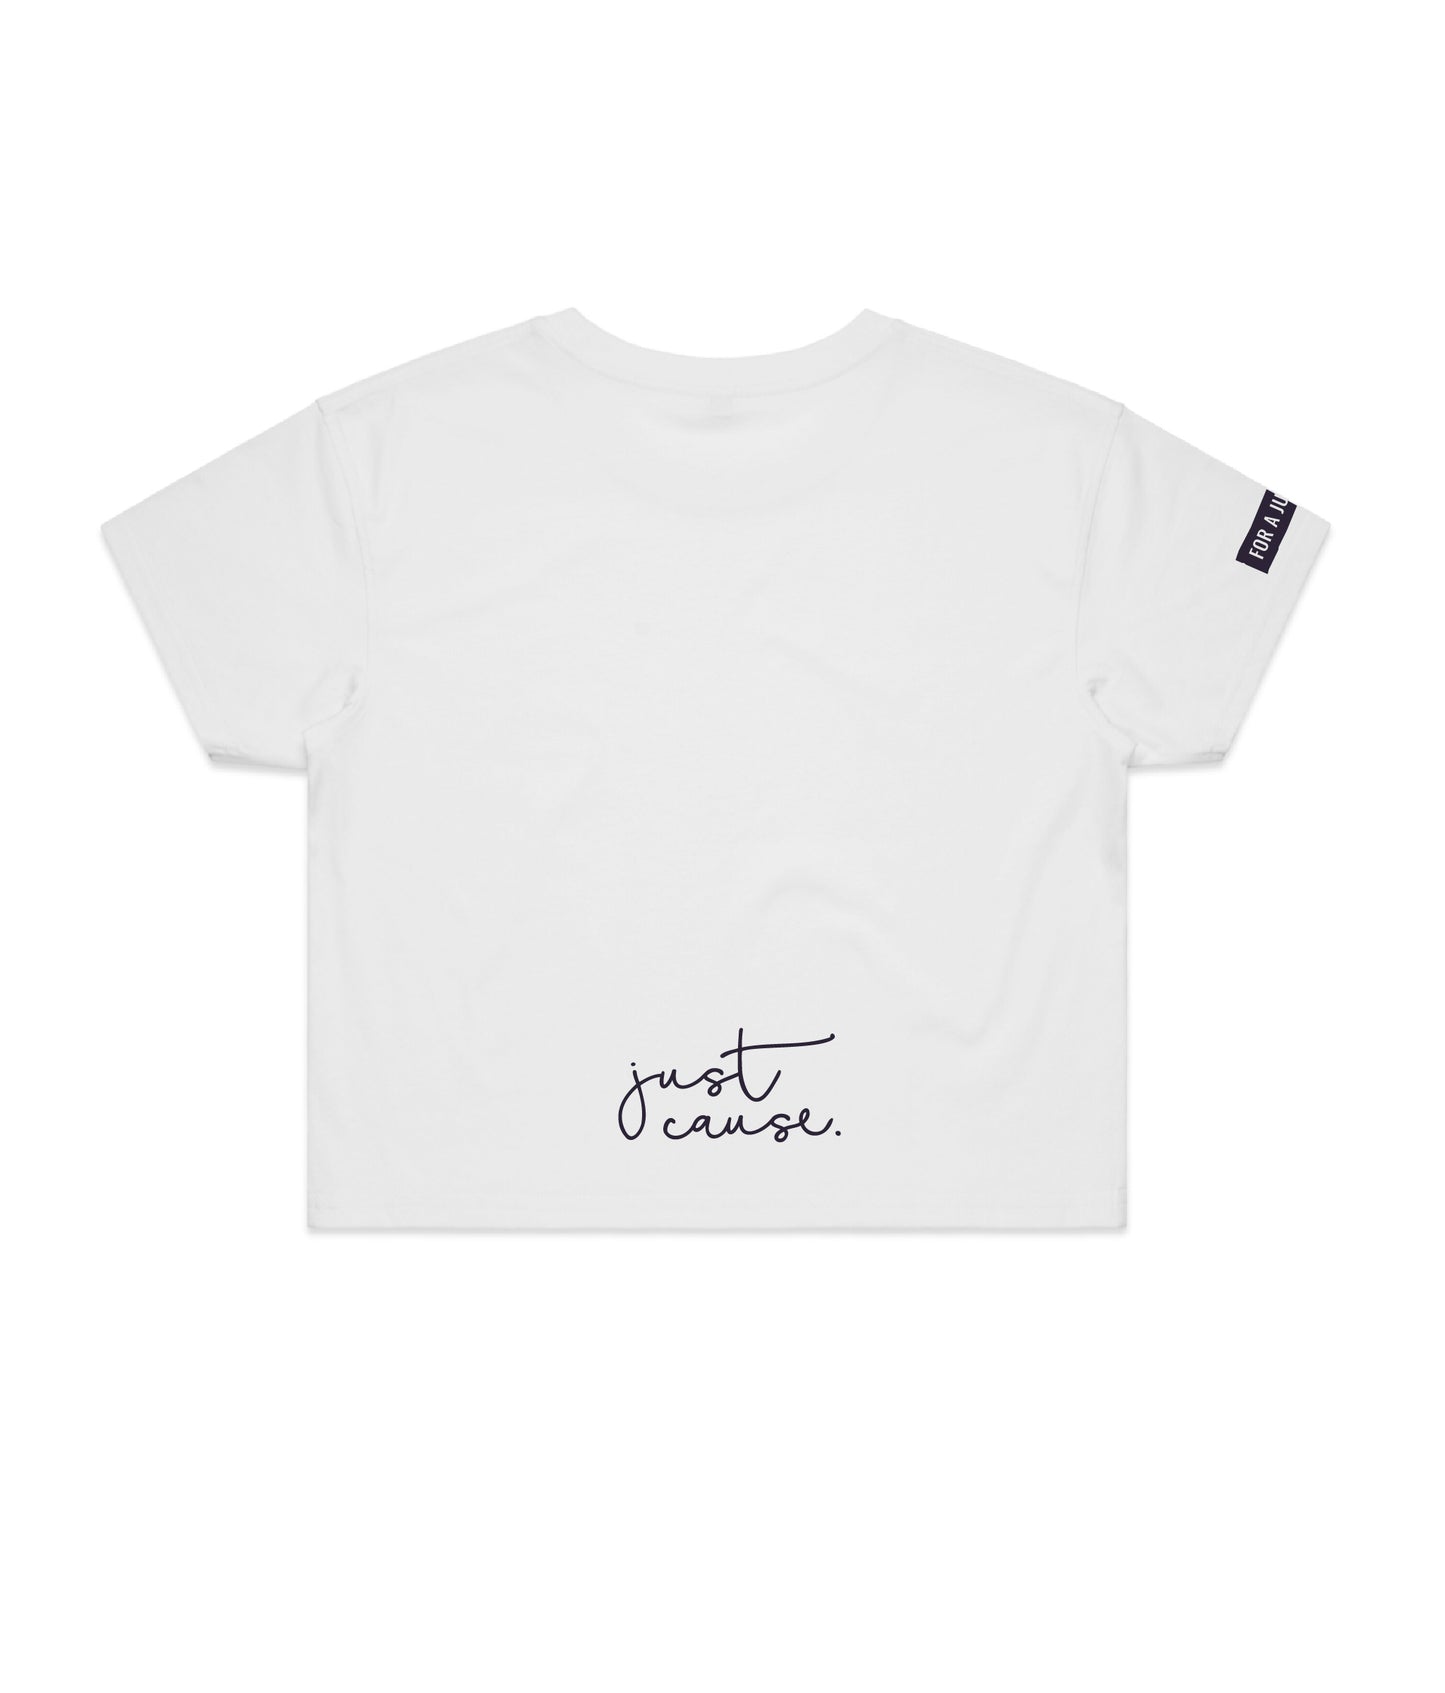 More Kindness Equality Justice . Crop Tee